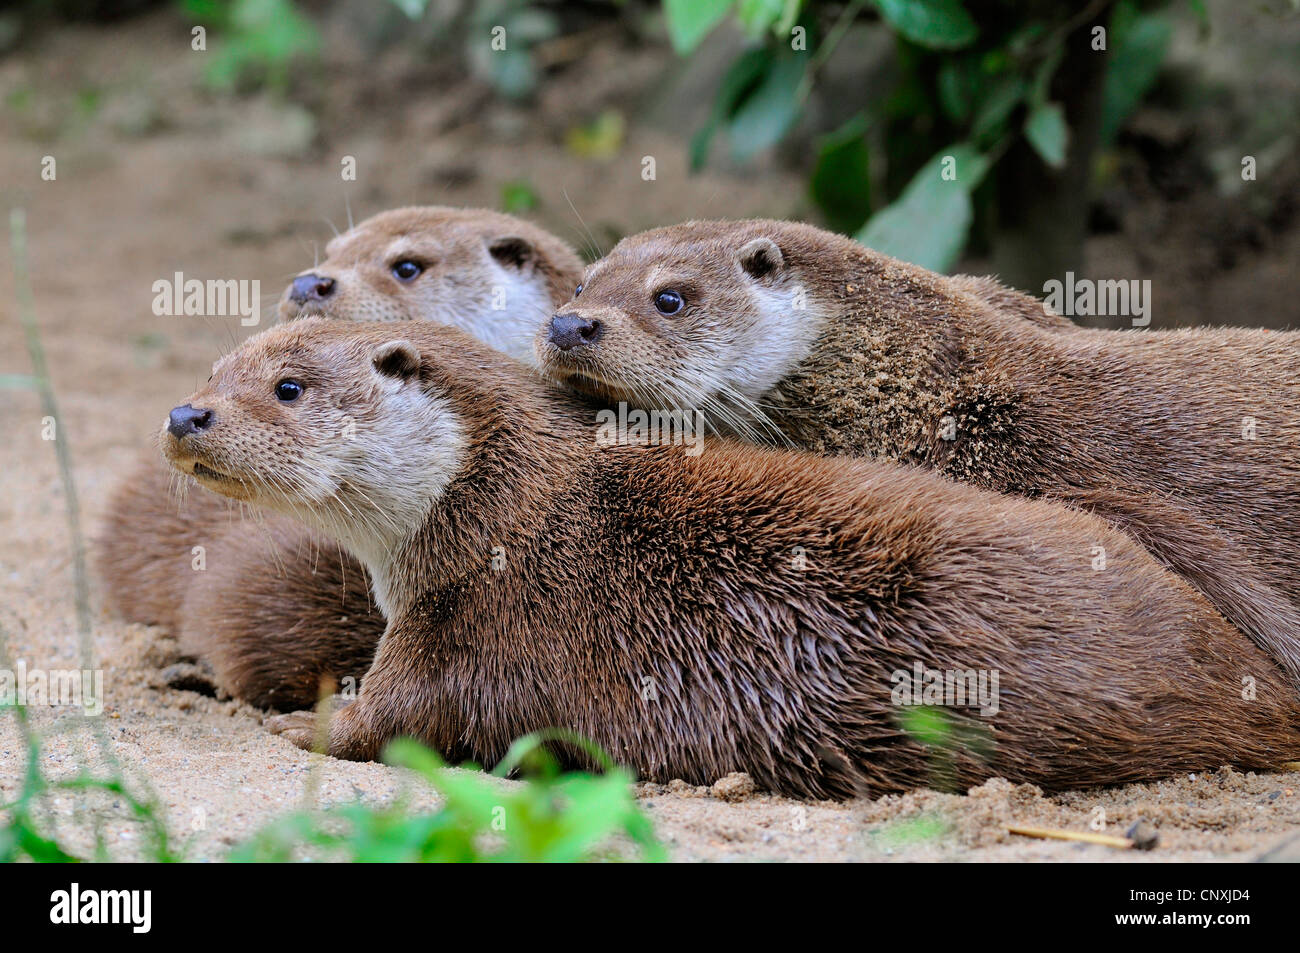 European river otter, European Otter, Eurasian Otter (Lutra lutra), three otters on a waterfront, Germany Stock Photo